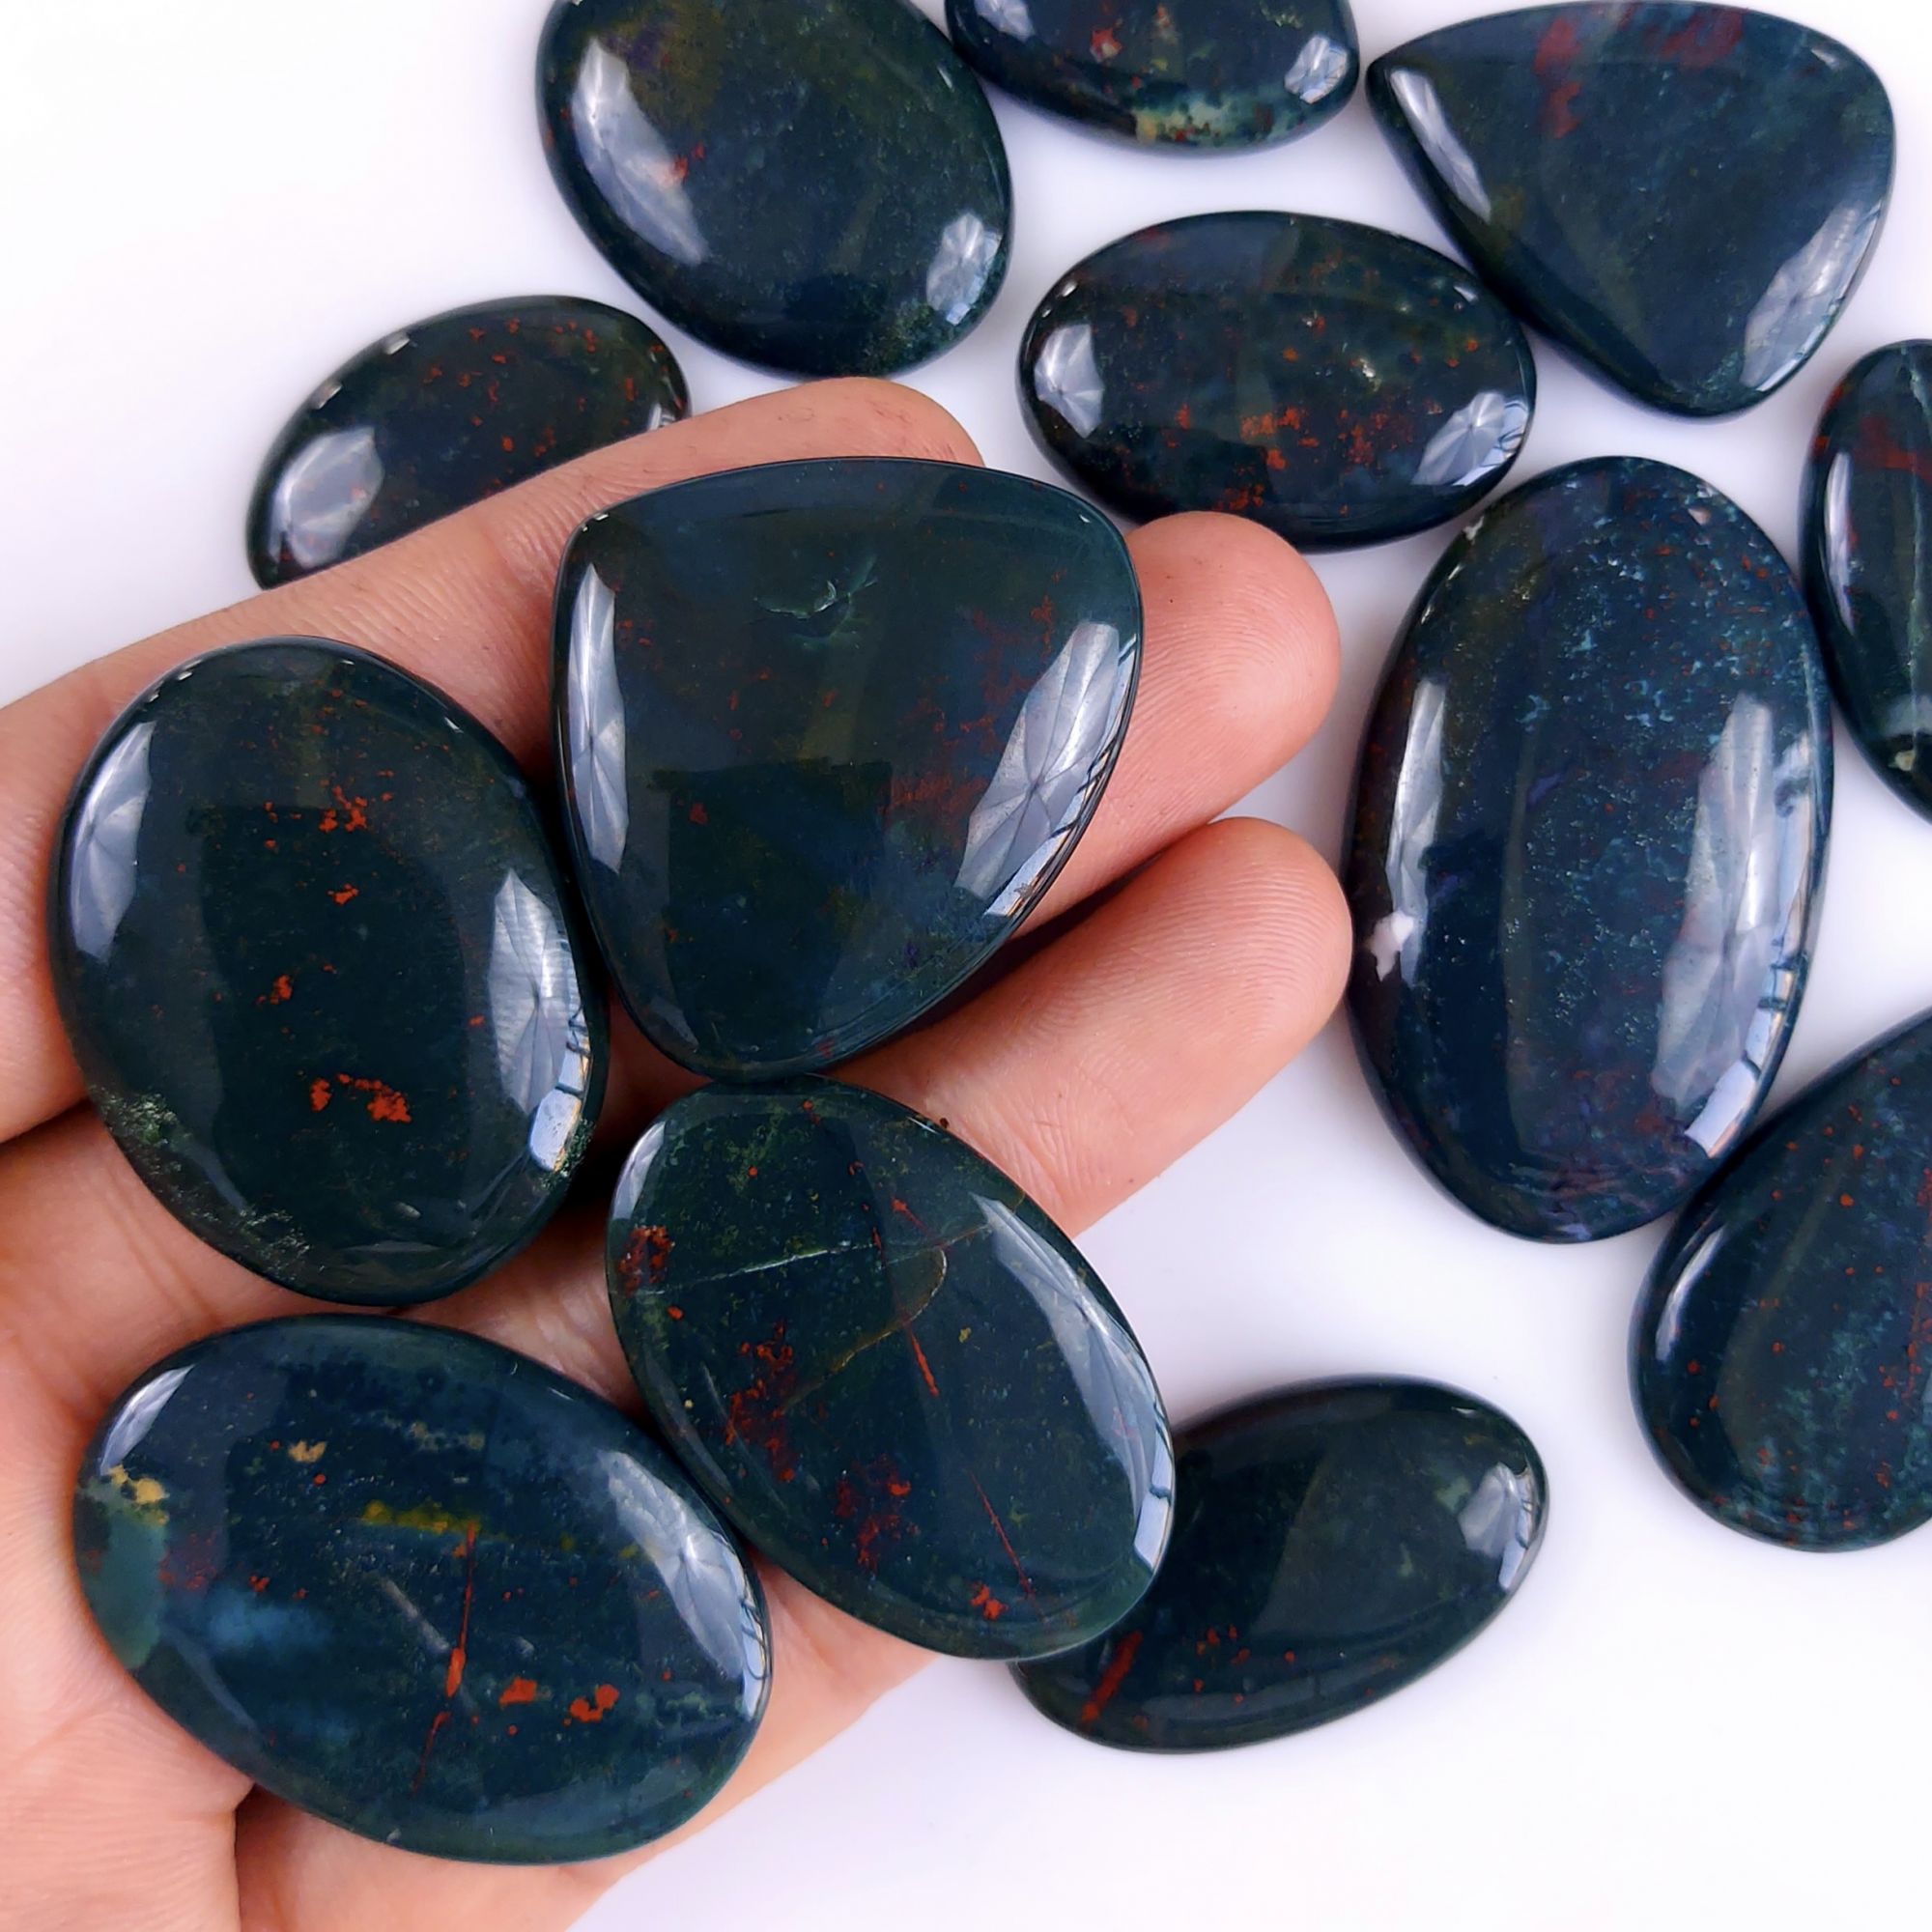 15Pcs 647Cts  Natural Green Blood Stone Loose Cabochon Gemstone Lot For Jewelry Making Gift For Her 45x30 32x14mm#907